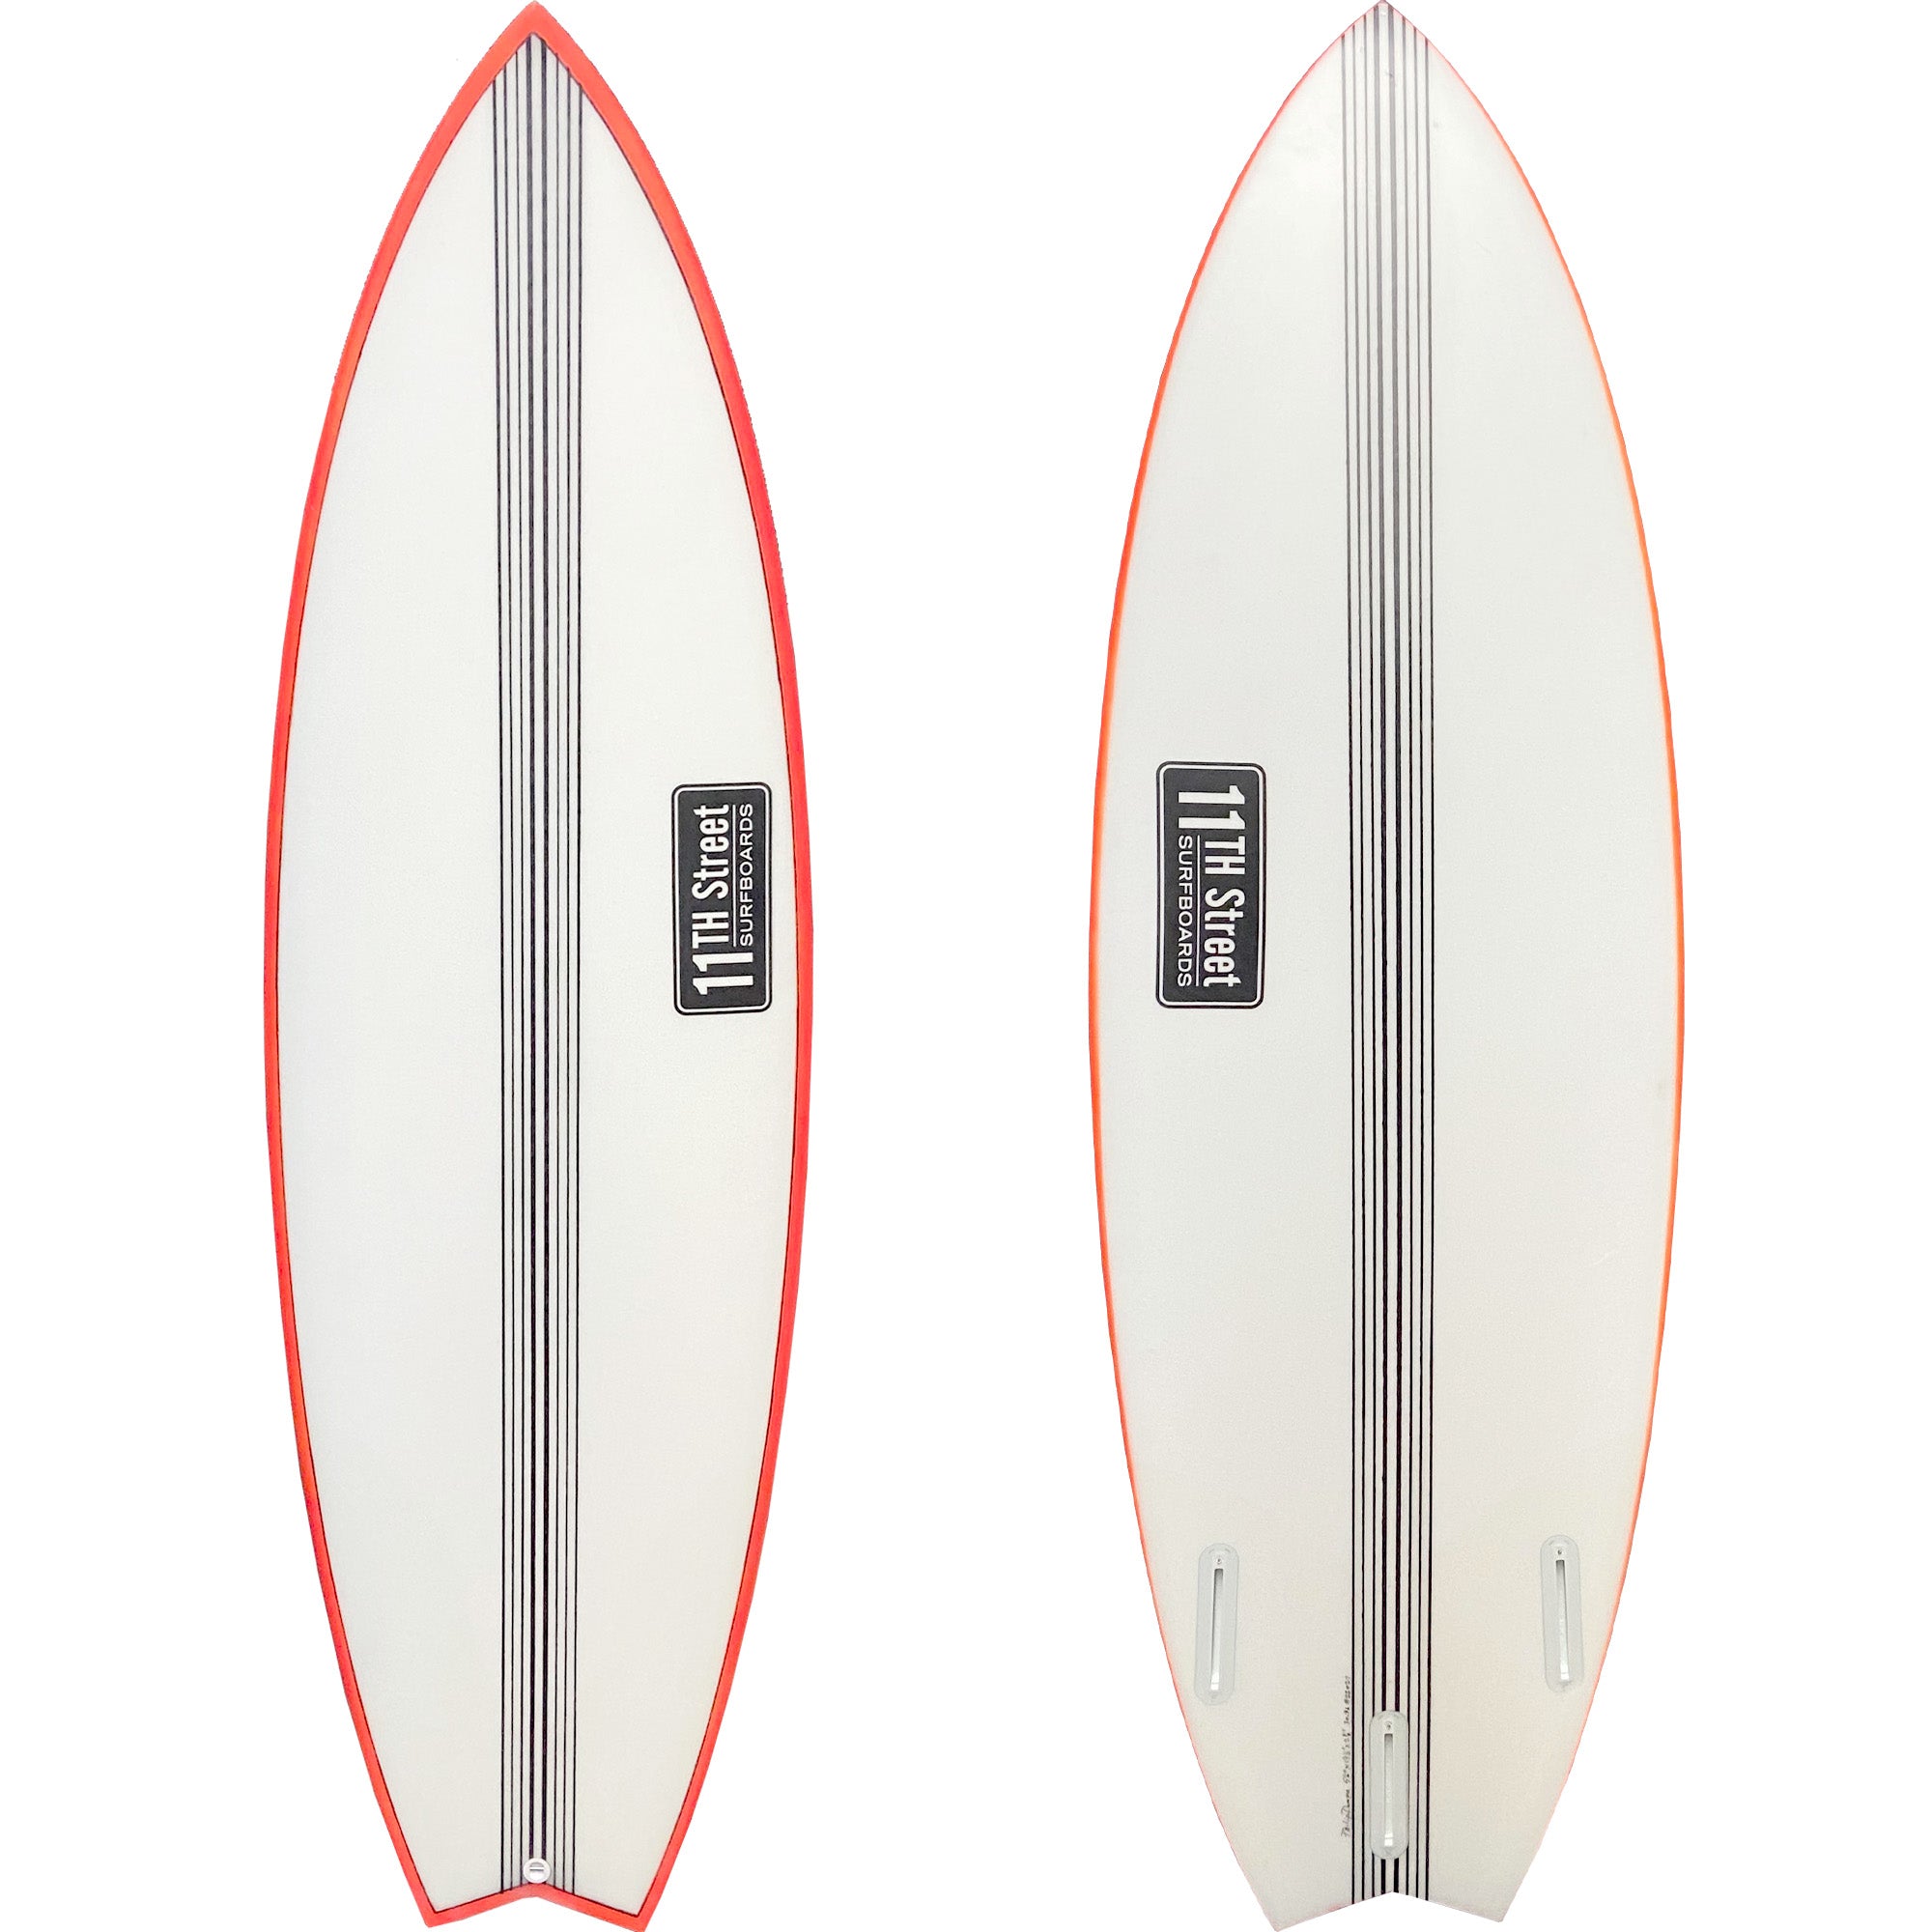 11th Street Surfboards Puffin EPS Surfboard - Futures